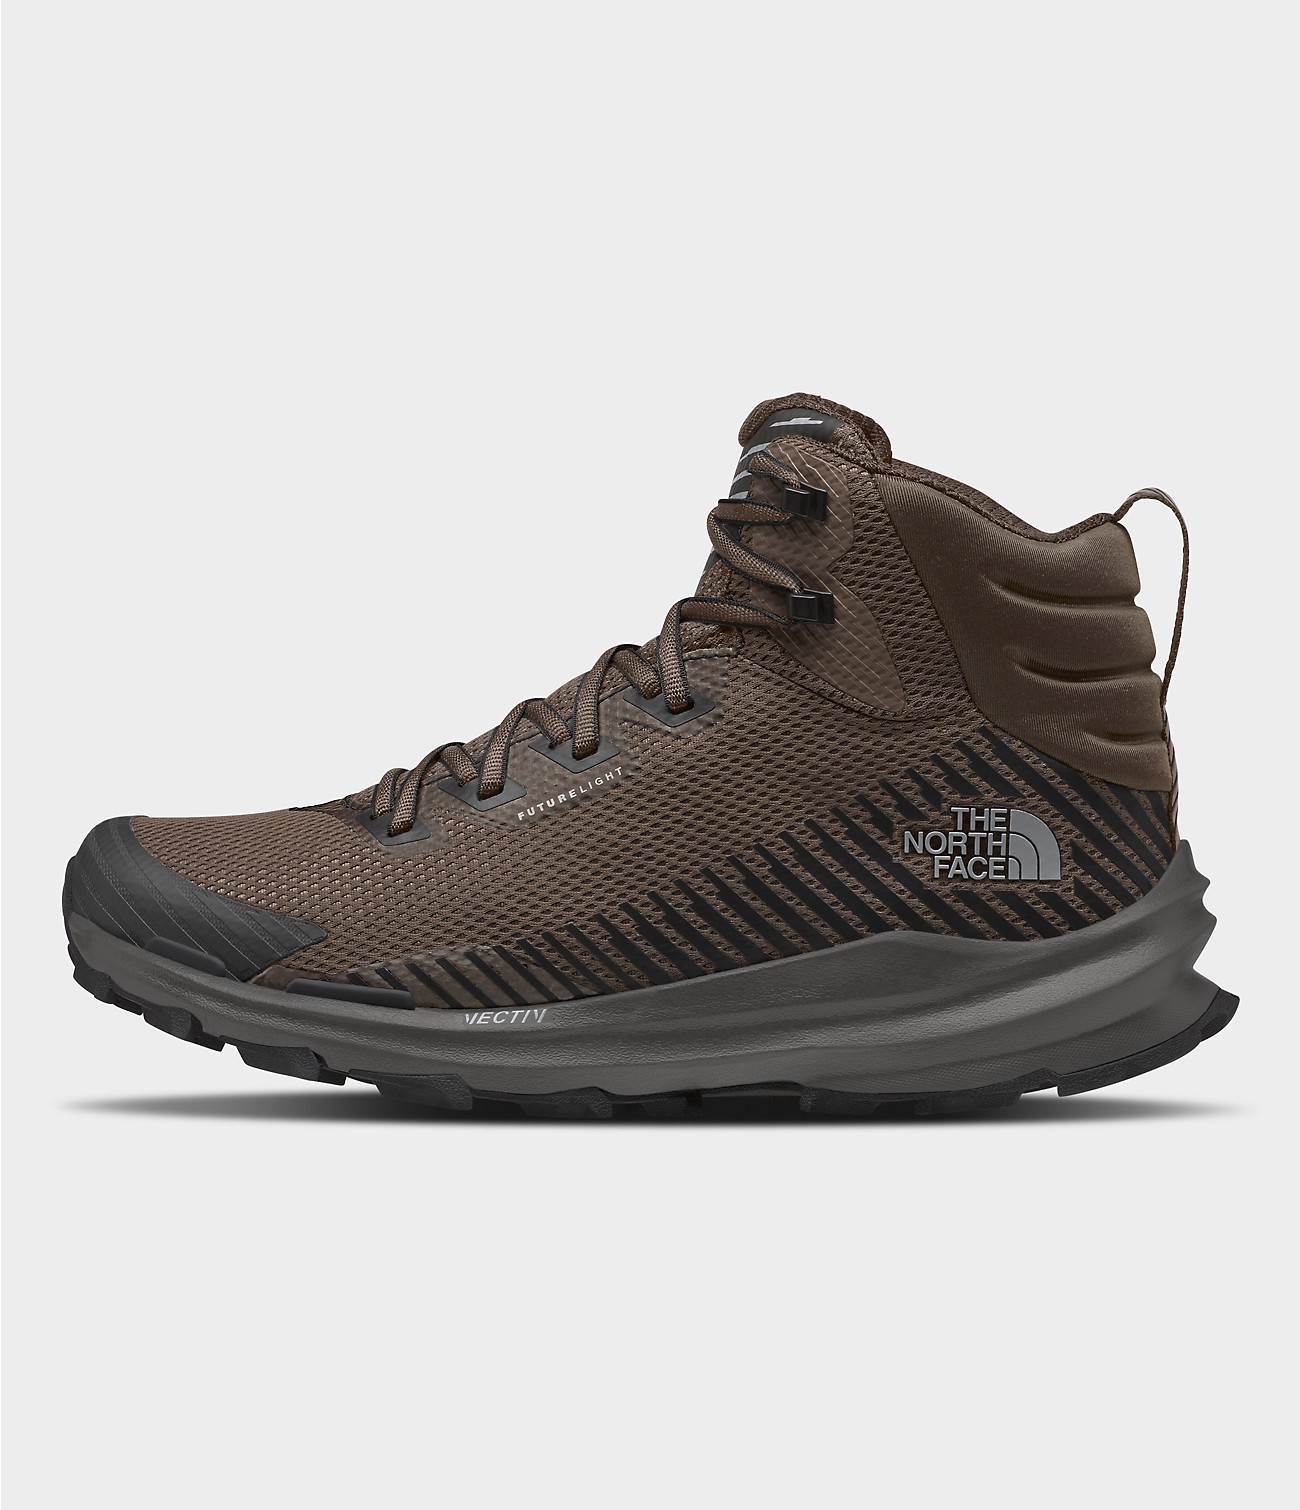 Unlock Wilderness' choice in the Karrimor Vs North Face comparison, the VECTIV™ Fastpack Mid Futurelight Boots by The North Face